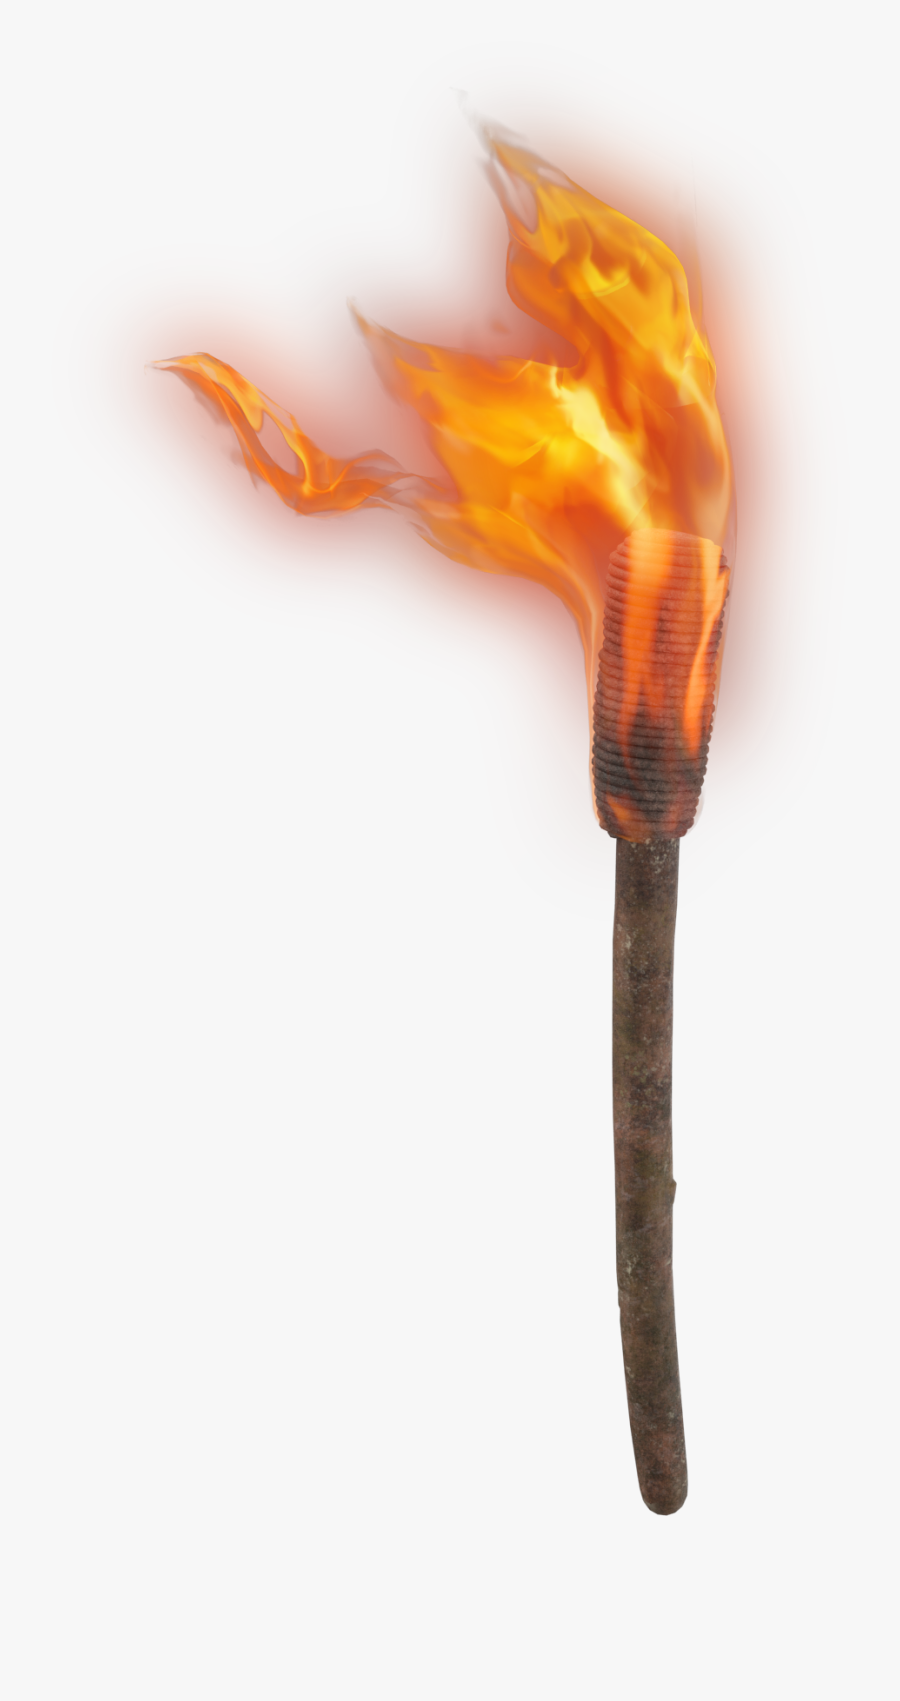 Hand Torch Png Image - Transparent Medieval Torch, Transparent Clipart